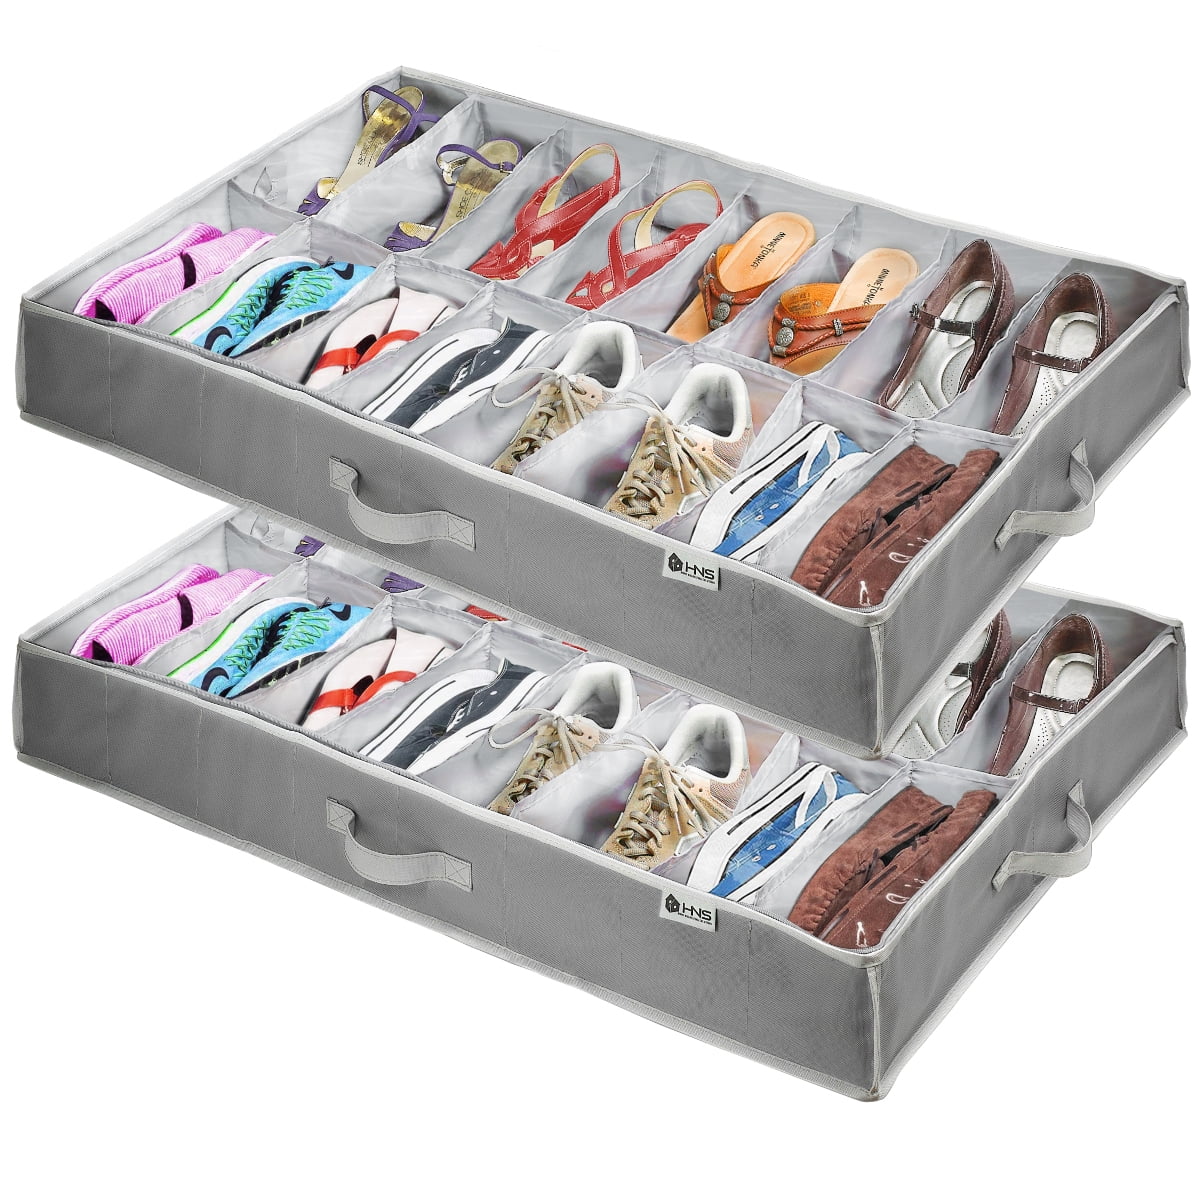 Share more than 153 under bed shoe drawer